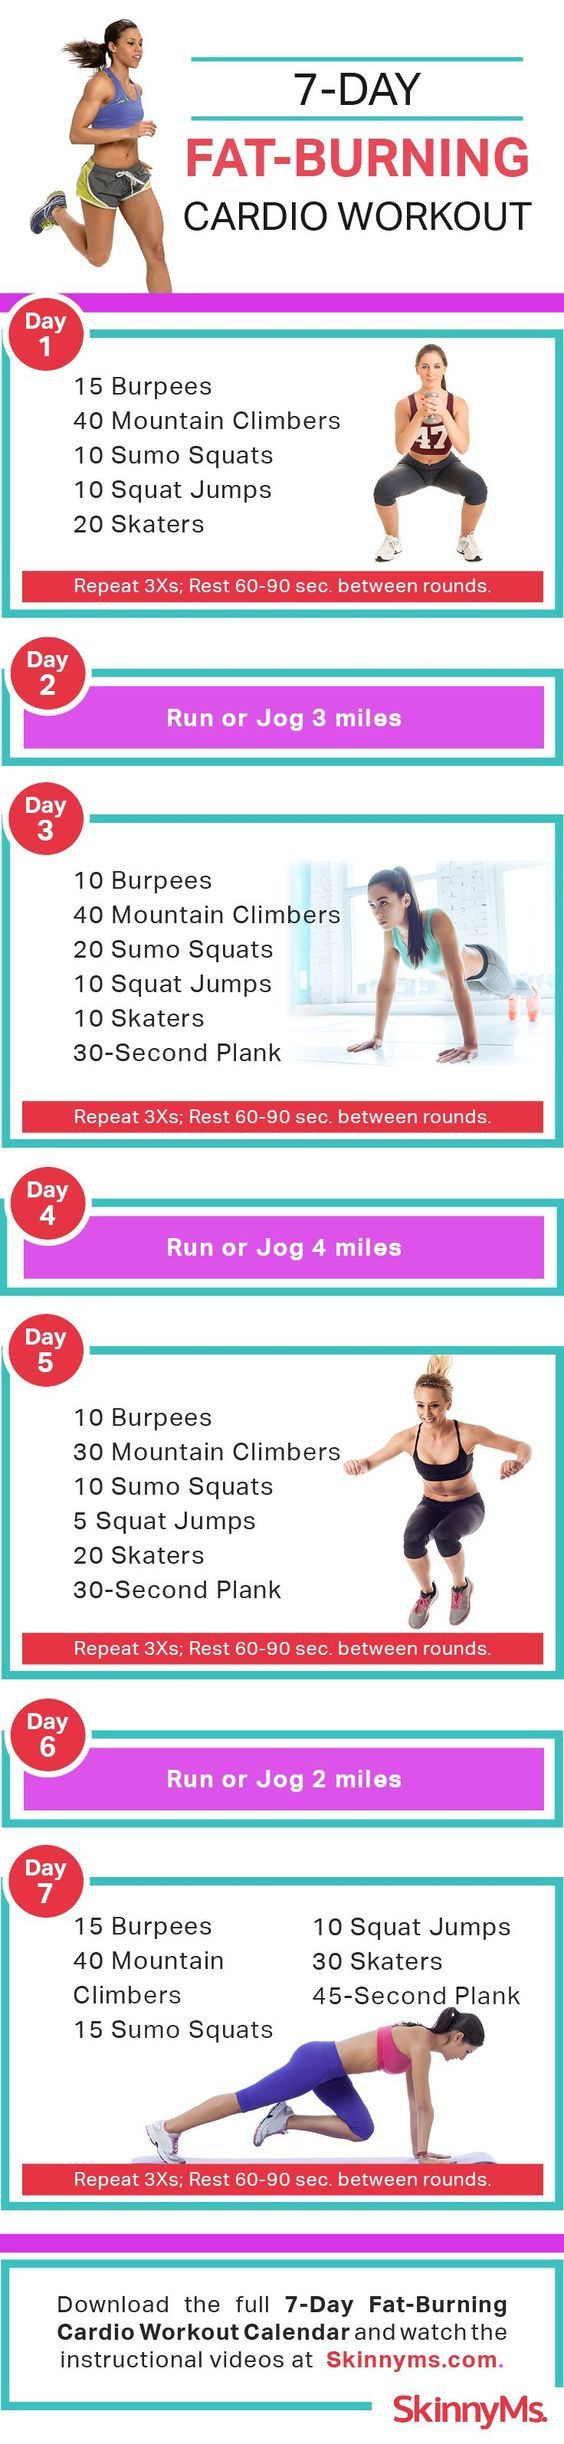 Cardio Fat Burning Workout
 7035 best images about Workouts on Pinterest